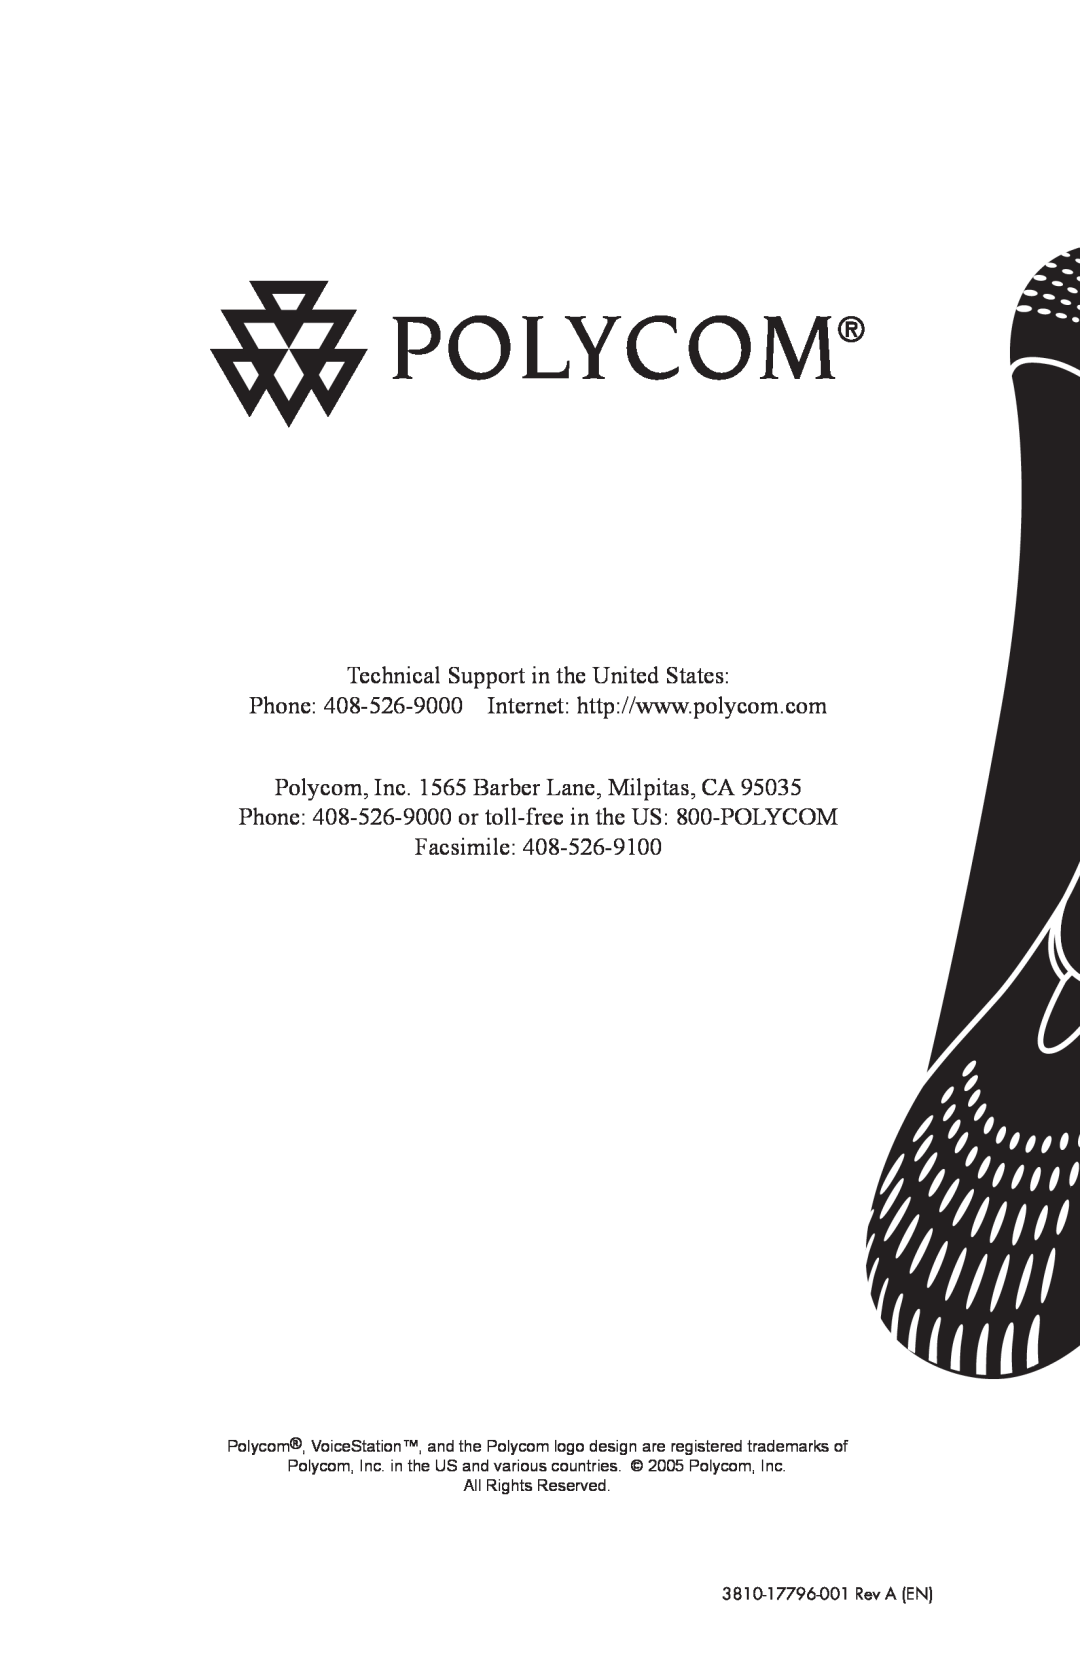 Polycom TM300 manual Technical Support in the United States, Polycom, Inc. 1565 Barber Lane, Milpitas, CA, Facsimile 